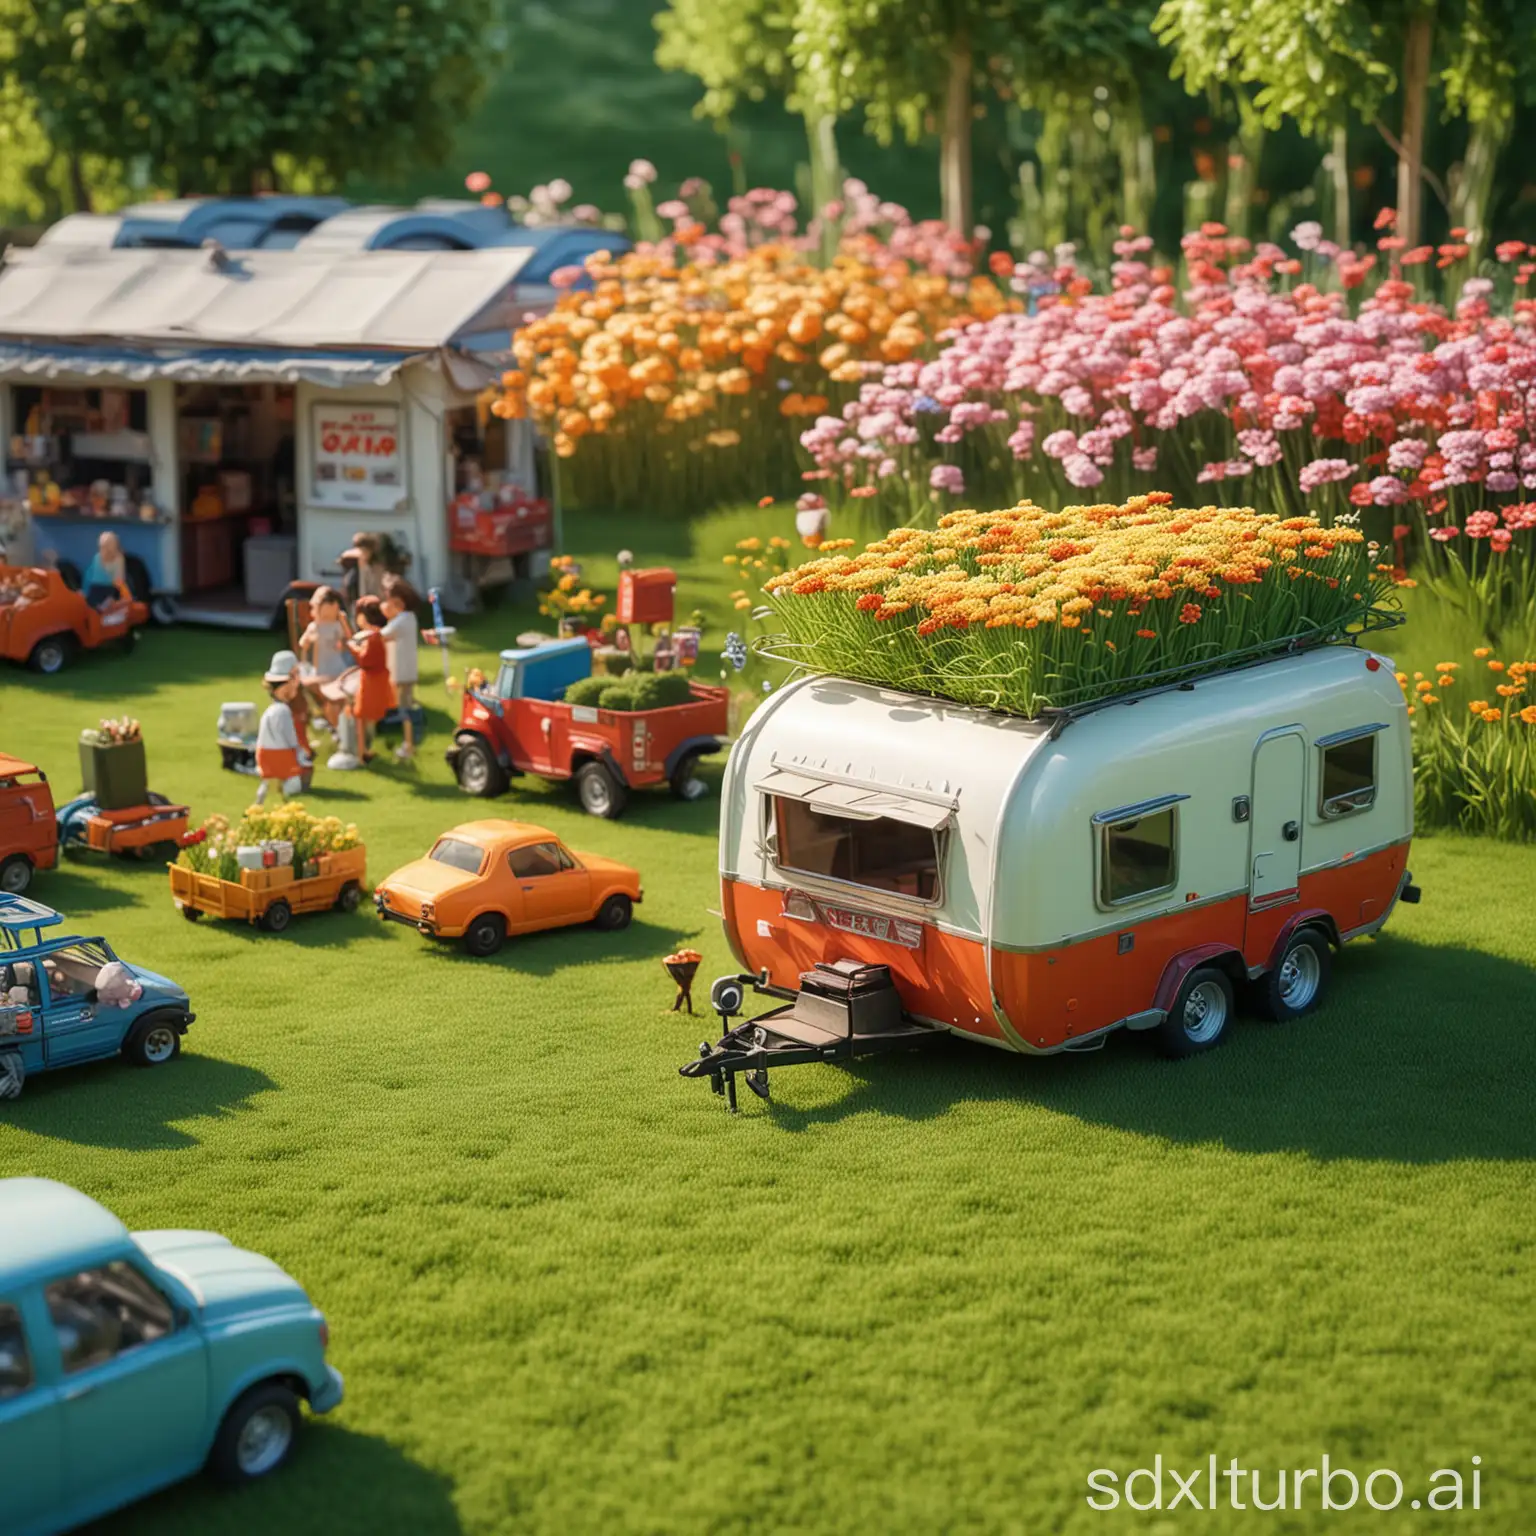 Vibrant-Outdoor-Market-Showcase-with-Colorful-Trailers-and-Dreamy-Visuals